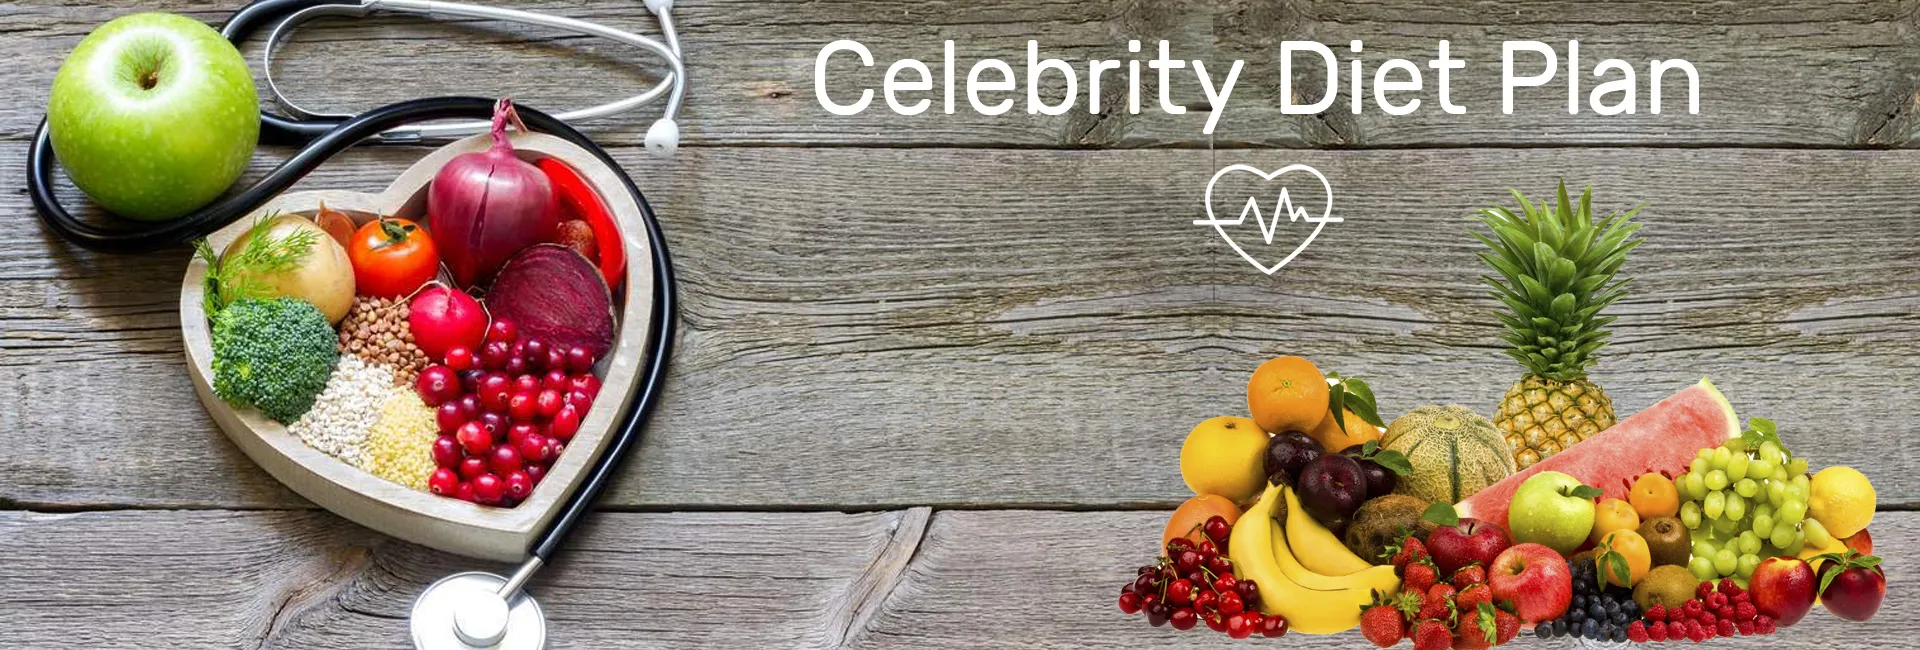 Celebrity Diet Plan In Northeastern Manitoulin And The Islands